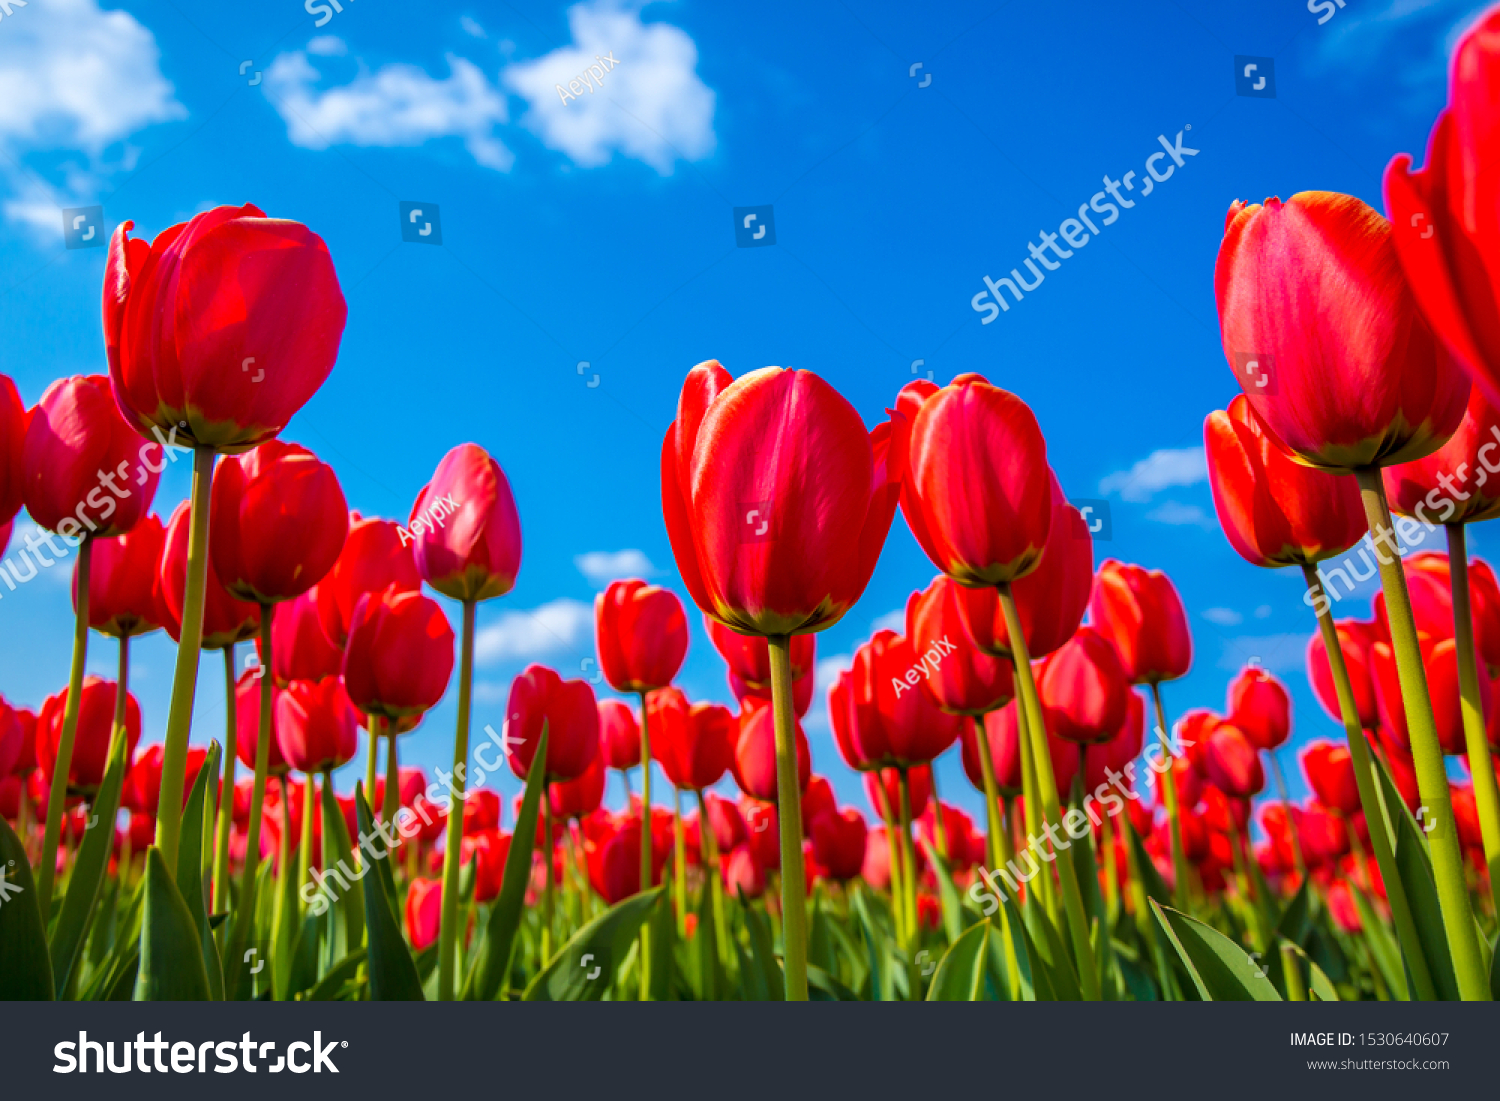 Ant eye view of Red tulip flower in the field with vivid color, Amsterdam, Netherlands. #1530640607